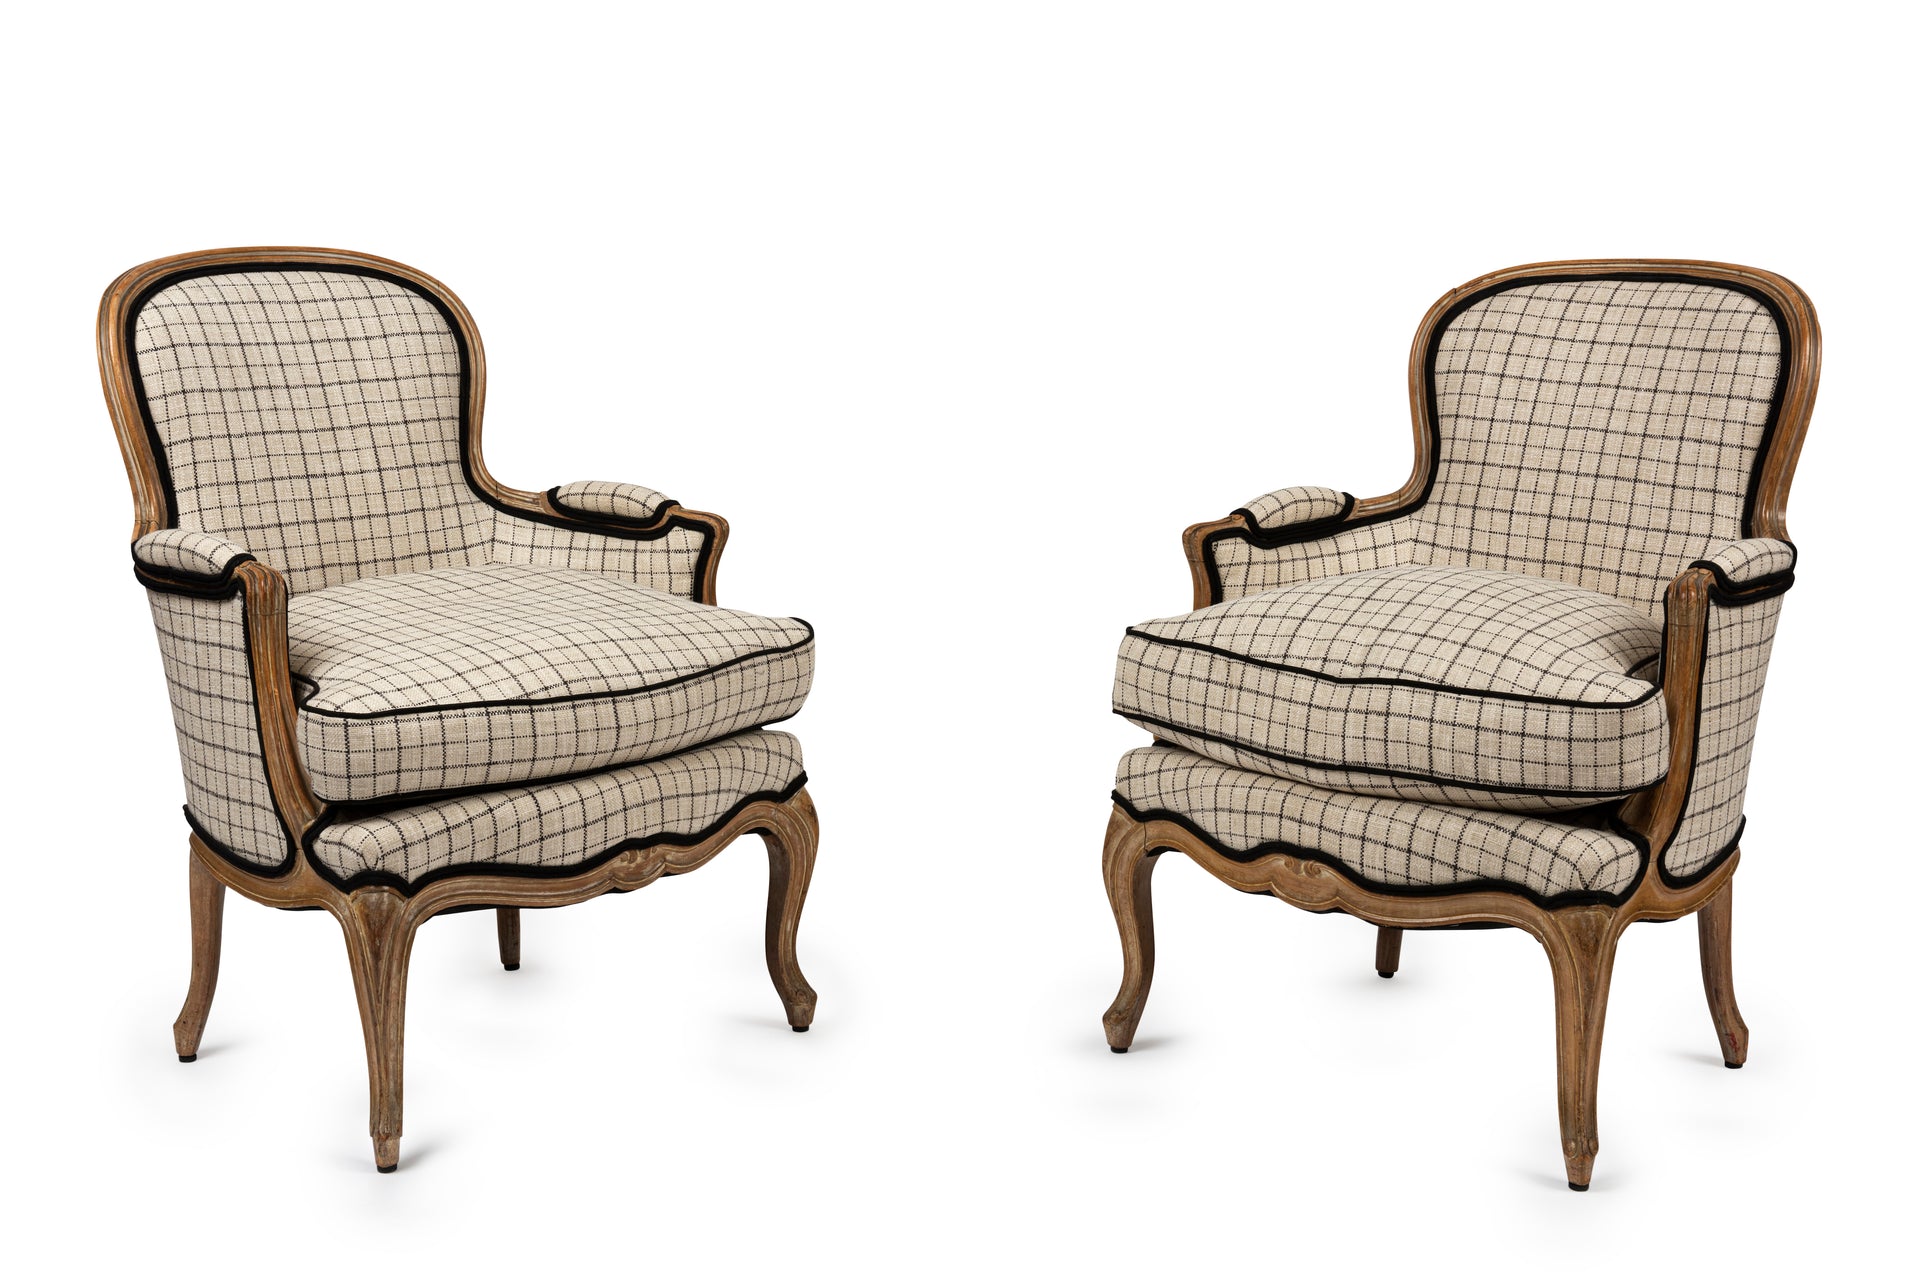 SOLD A stylish pair of Louis XVI style fauteuils, French 19th Century